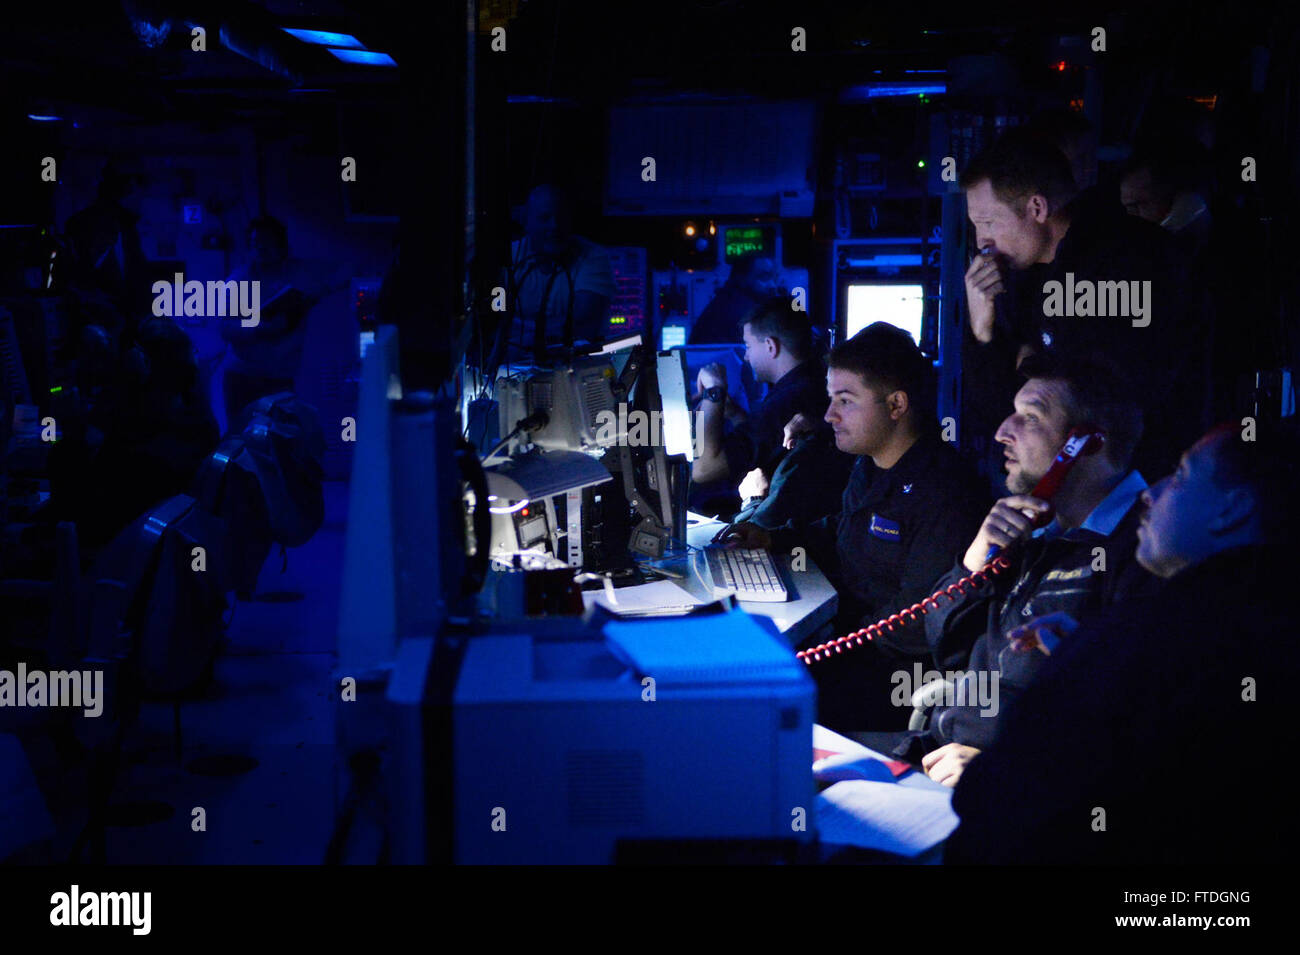 151020-N-XT273-046 ATLANTIC OCEAN (Oct. 20, 2015) Sailors aboard the Arleigh Burke-class destroyer USS Ross (DDG 71) monitor message traffic in the combat information center during the Maritime Theater Missile Defense (MTMD) Forum's at Sea Demonstration (ASD-15). Ships from Canada, France, Italy, The Netherlands, Norway, Spain, United Kingdom, and the United States tracked and destroyed target ballistic and anti-ship cruise missiles during the demonstration's six-live fire scenarios. Germany provided personnel to the multi-national Combined Task Group staff. (U.S. Navy photo by Mass Communicat Stock Photo